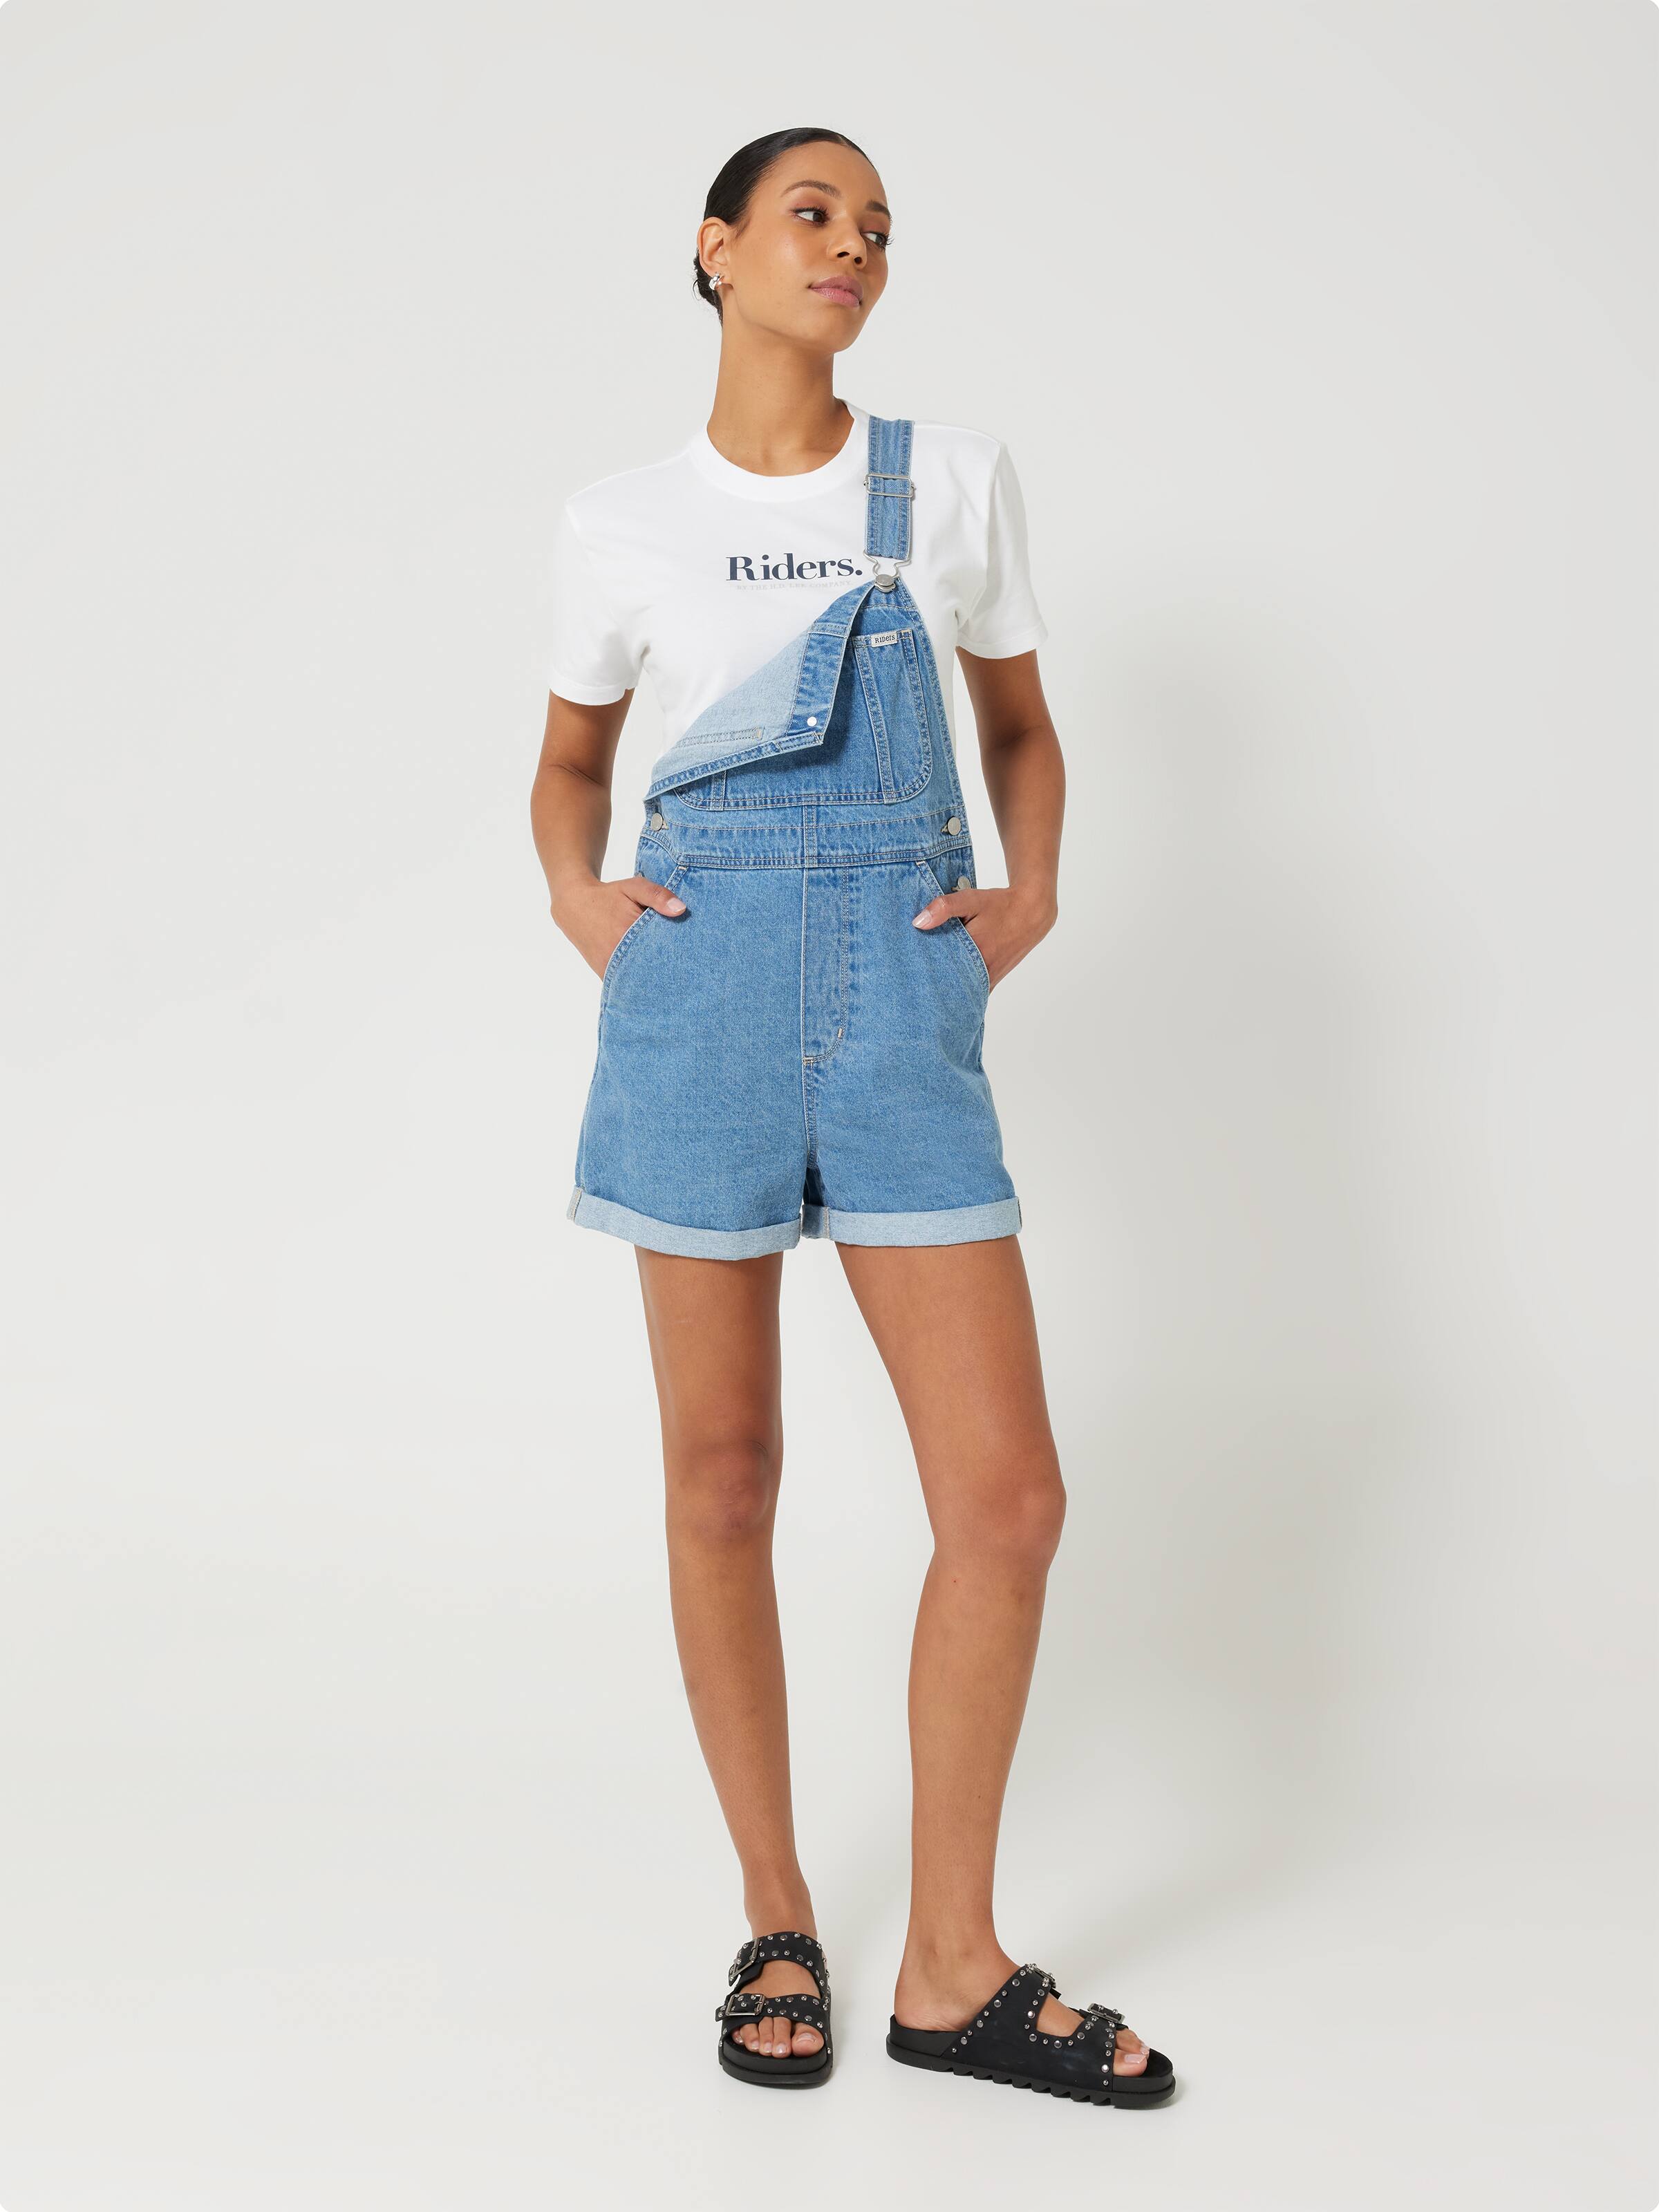 90'S Dungaree Short In River Fade - Just Jeans Online